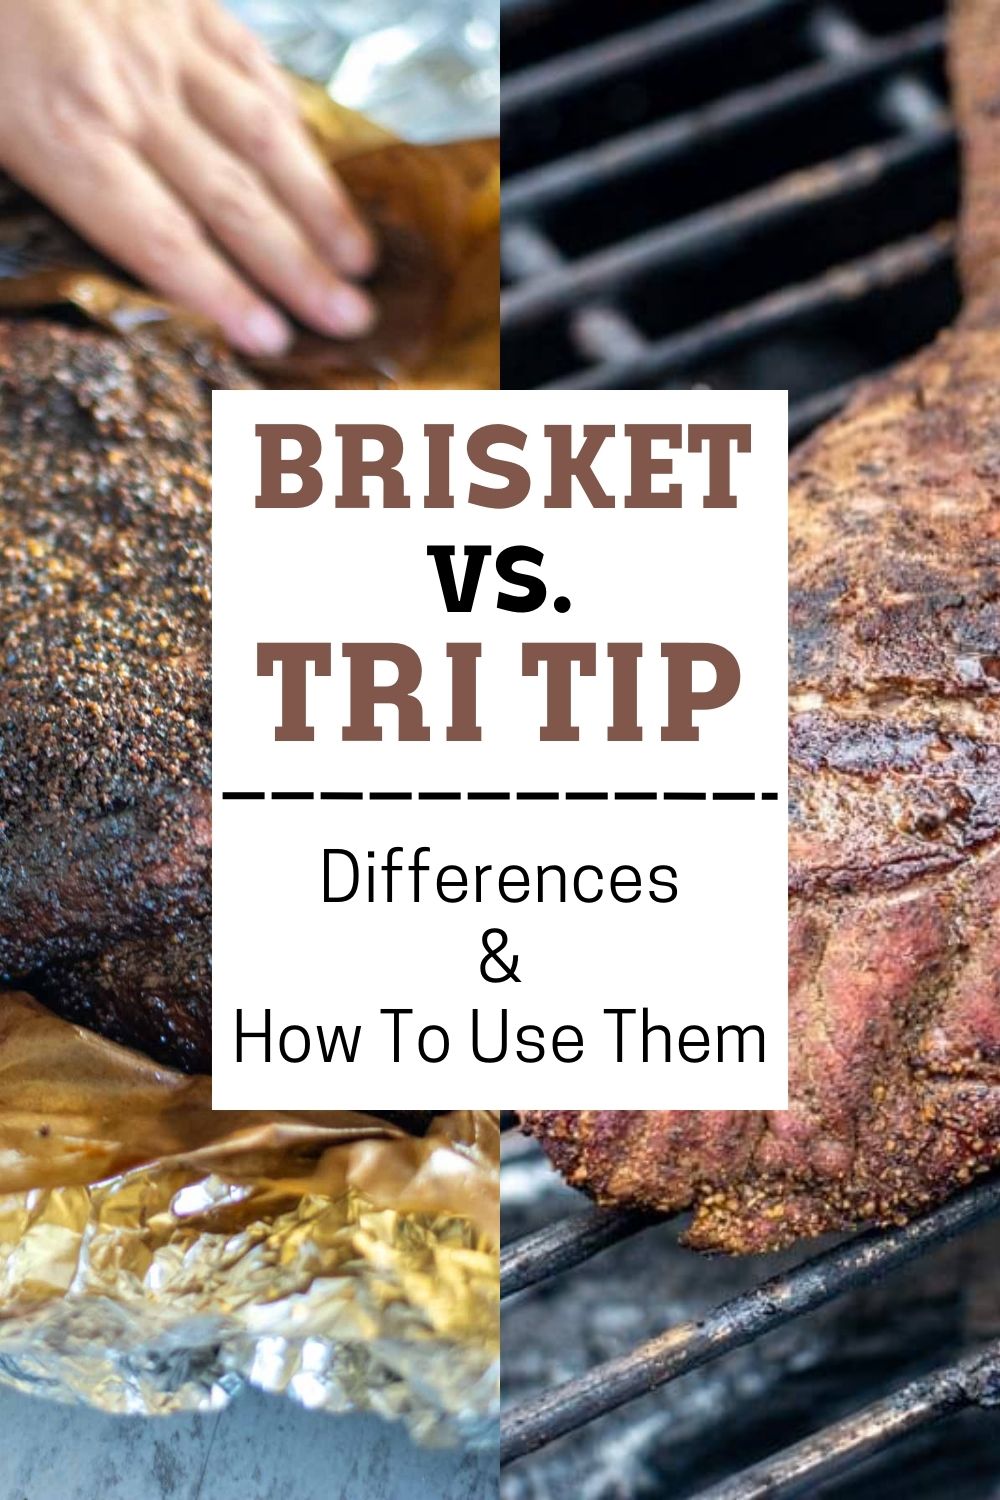 Brisket vs. Tri Tip: How Are They Different?